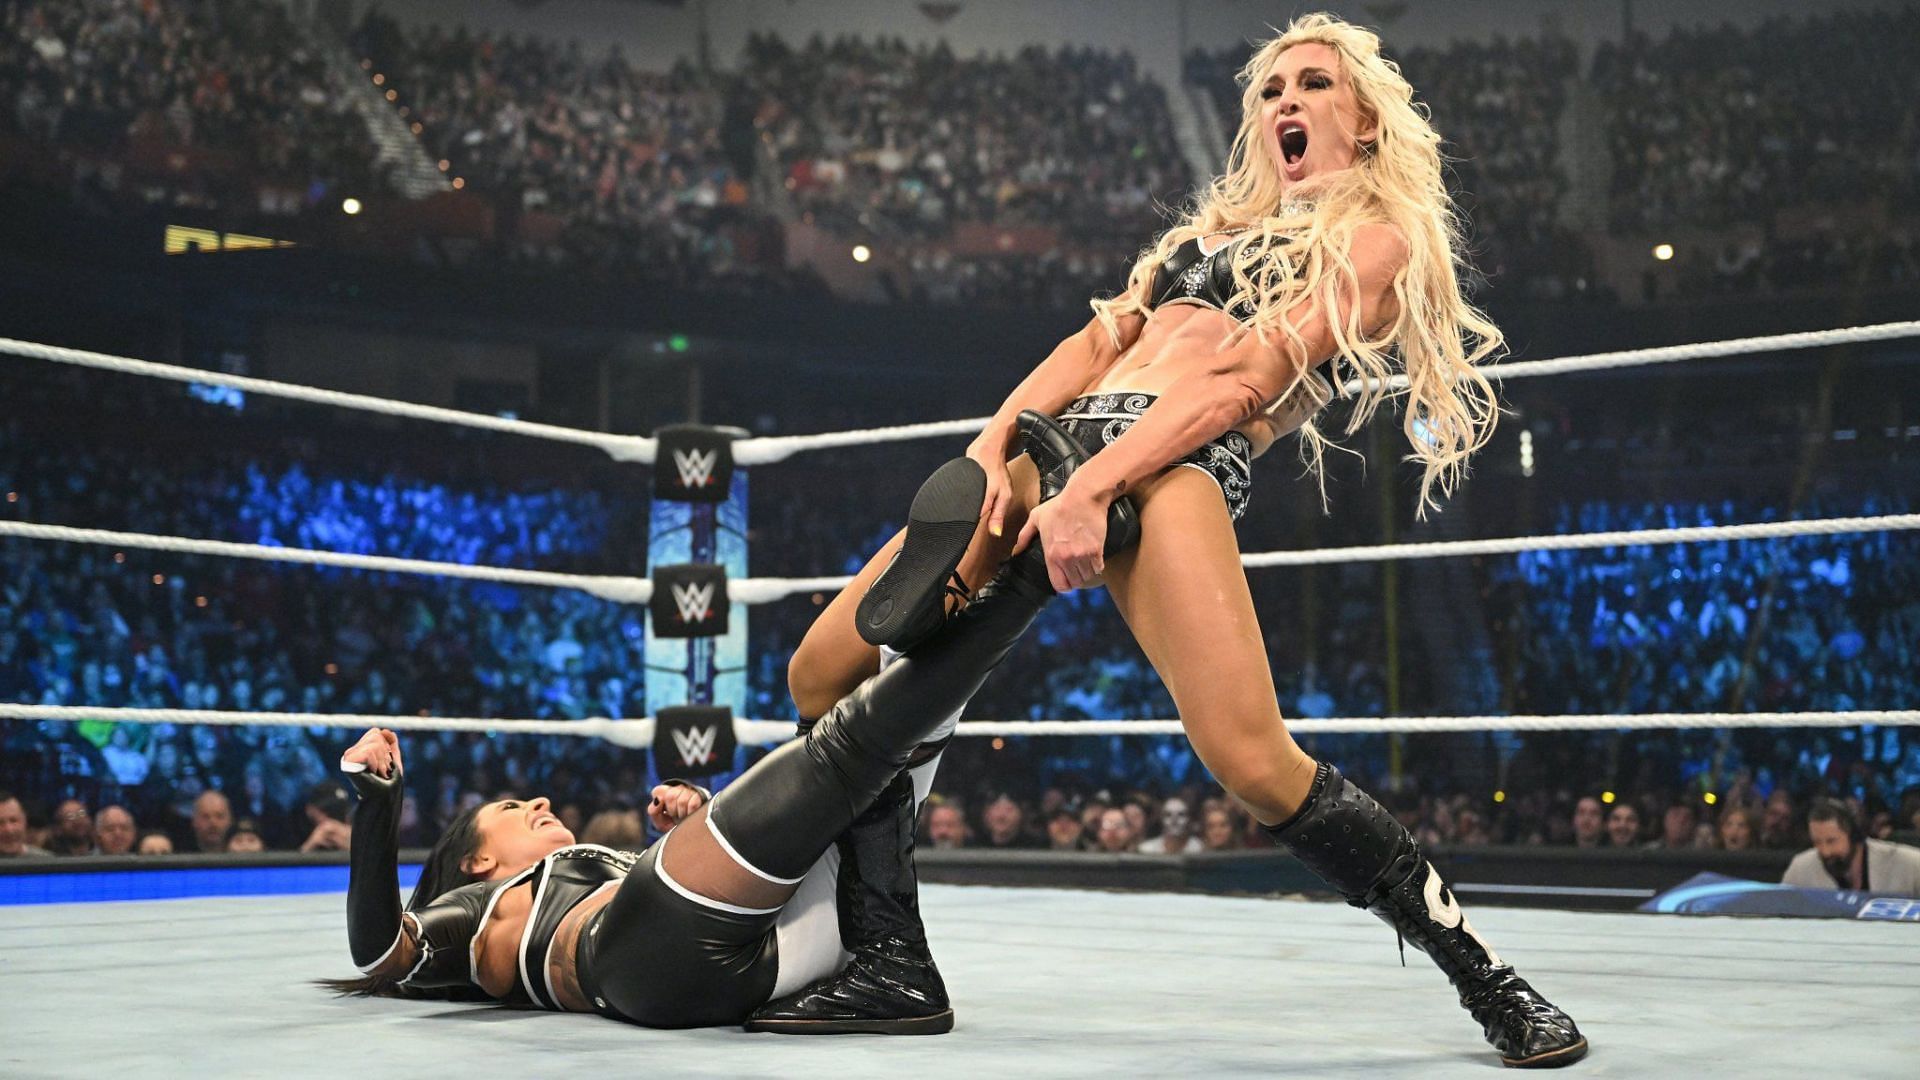 Charlotet Flair recently returned to WWE television after a 7-month hiatus